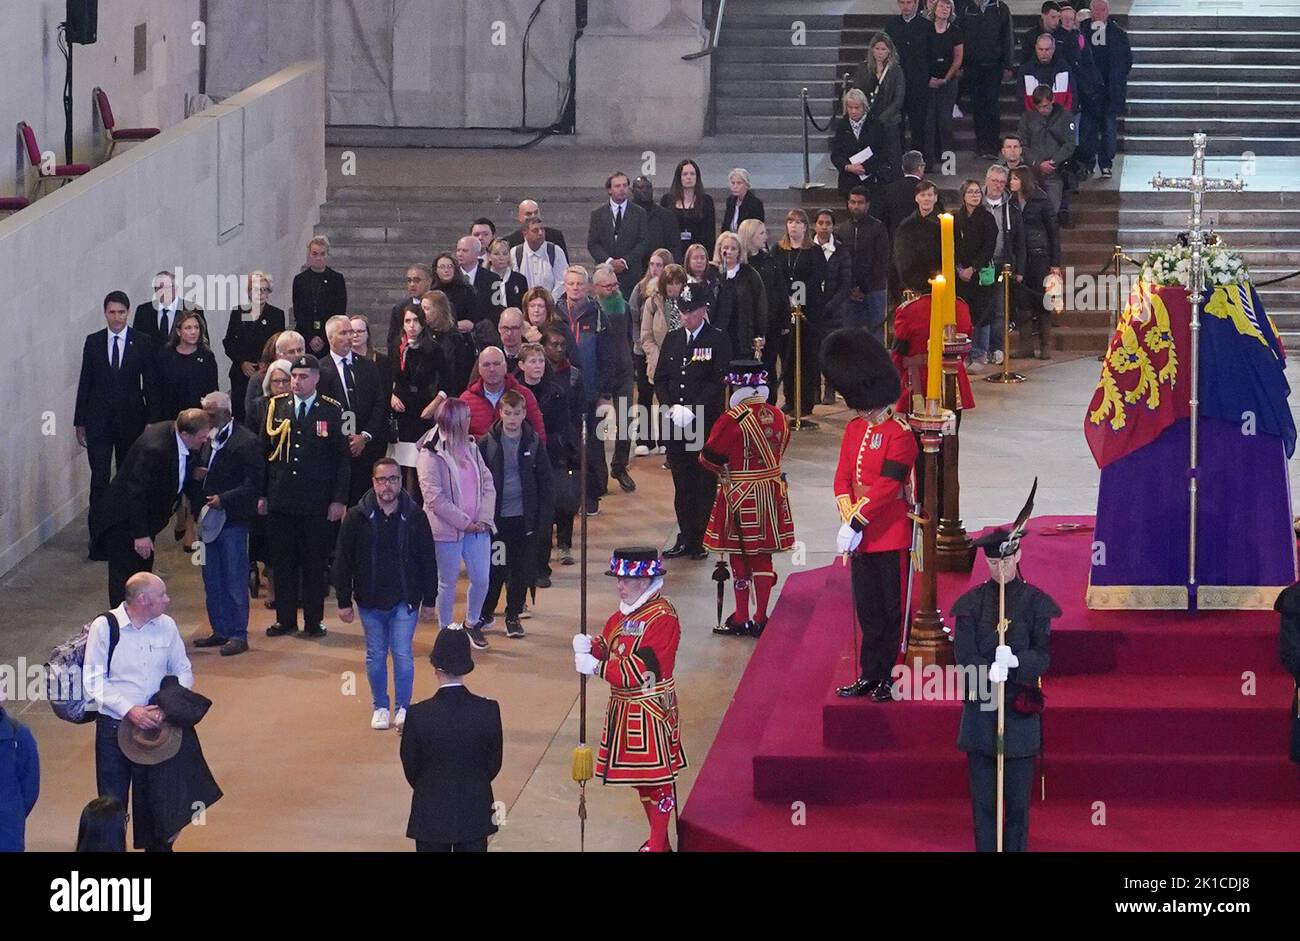 Prime Minister of Canada, Justin Trudeau (far left), views the coffin of Queen Elizabeth II, draped in the Royal Standard with the Imperial State Crown and the Sovereign's orb and sceptre, lying in state on the catafalque in Westminster Hall, at the Palace of Westminster, London, ahead of her funeral on Monday. Picture date: Saturday September 17, 2022. Stock Photo